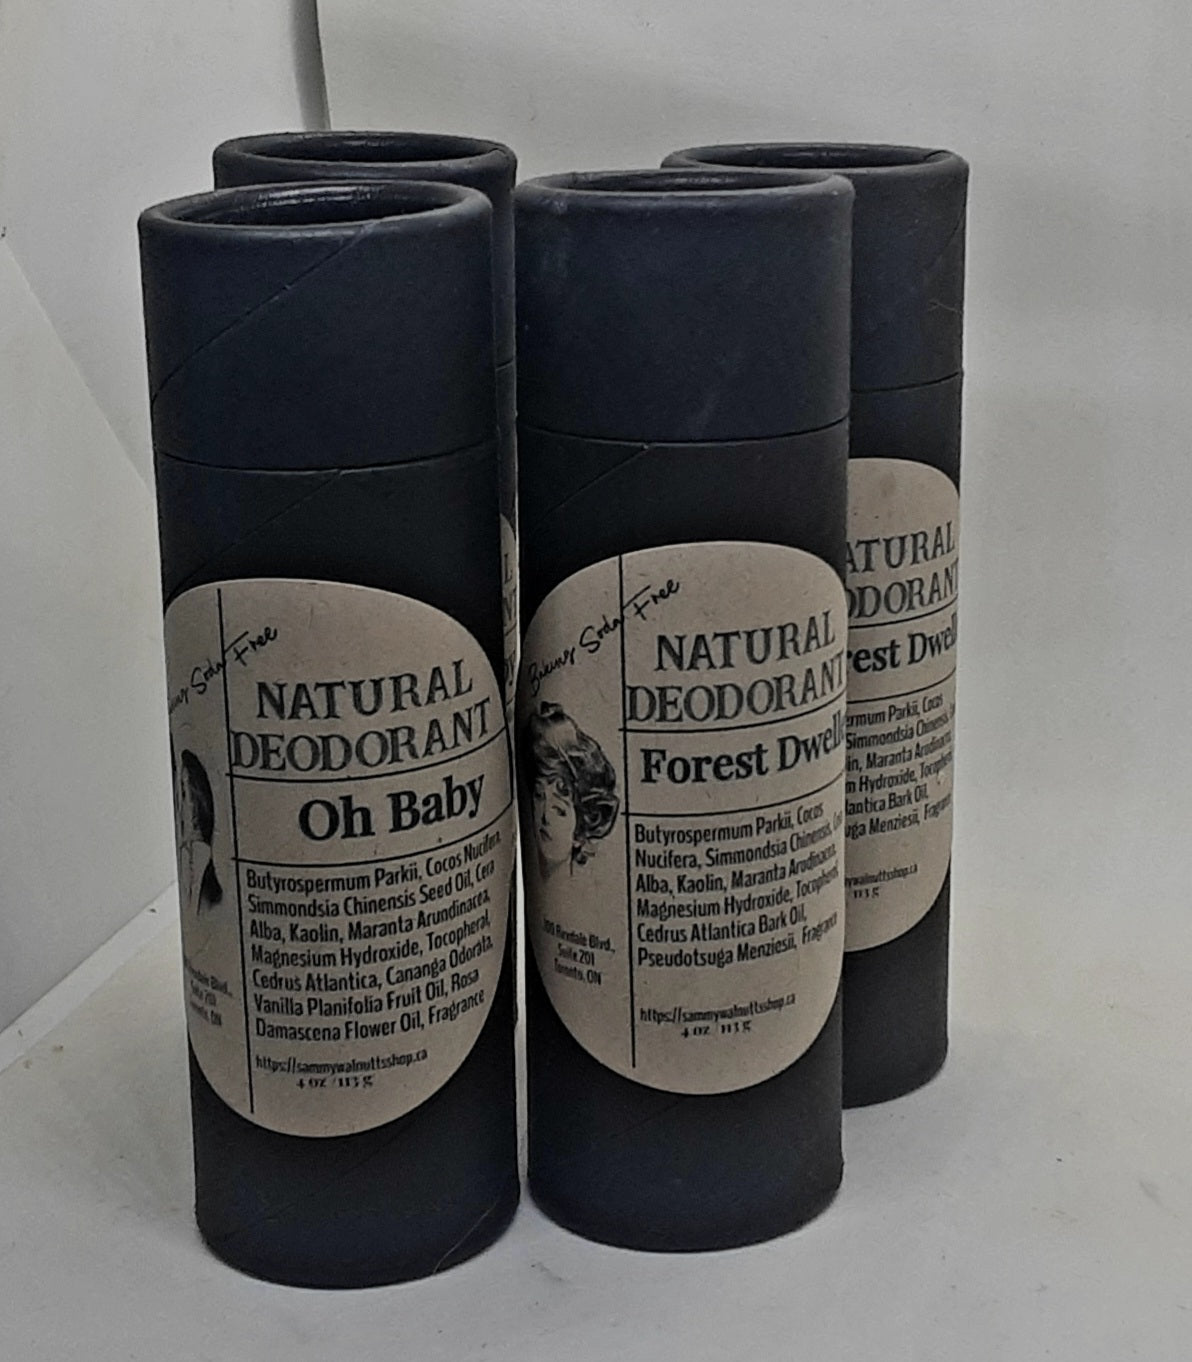 Natural Deodorants for Underarms, Décolletage and Feet, Baking Soda Free - 4 oz Size